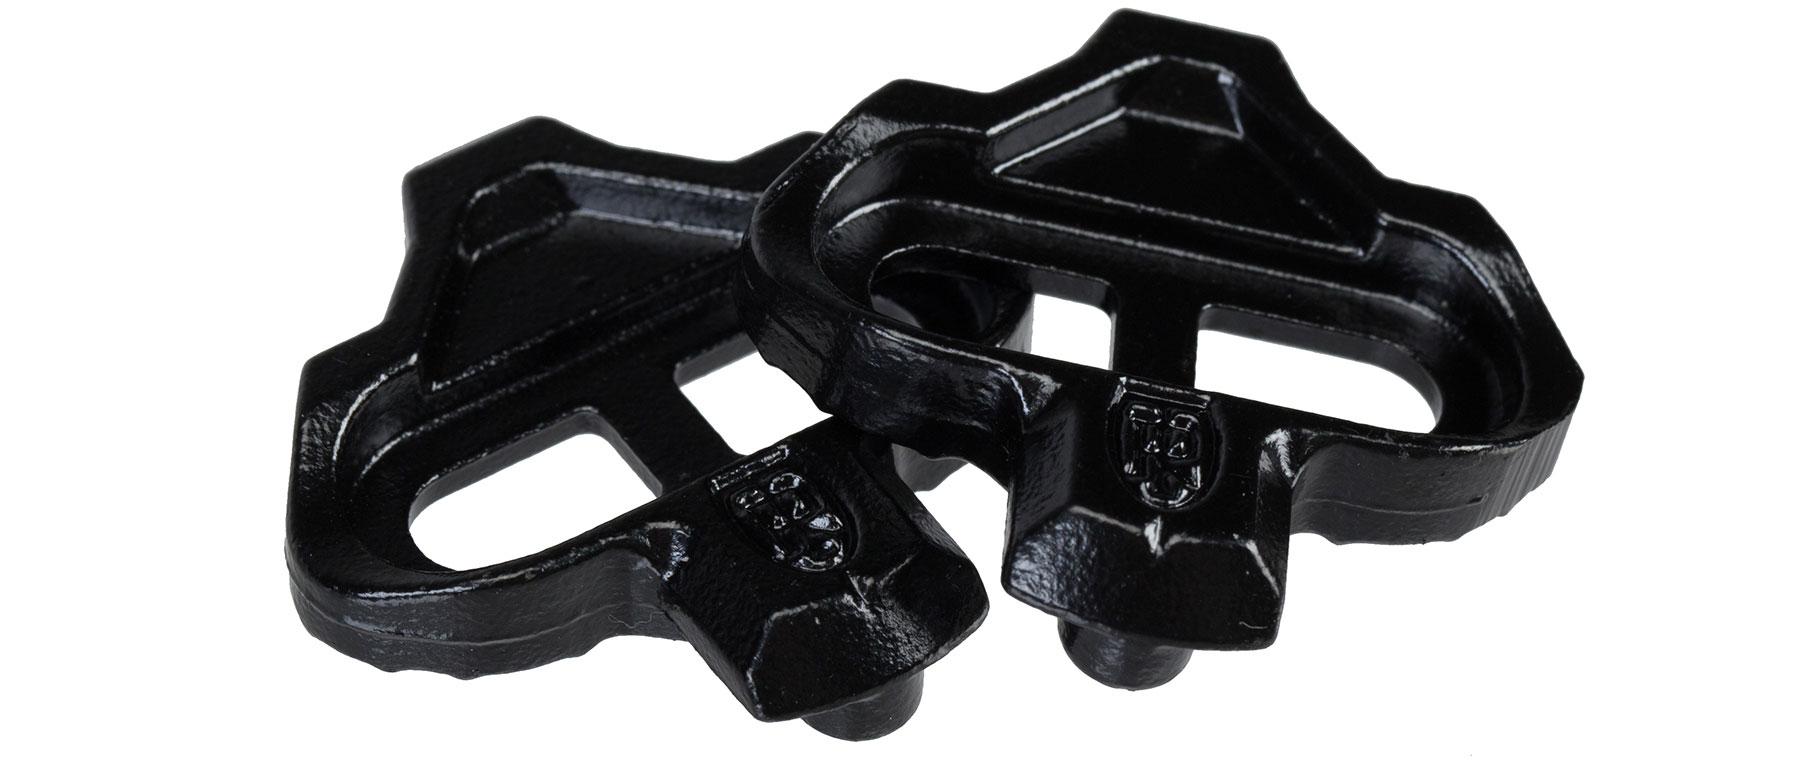 Ritchey Pro Micro Road Pedal Cleats